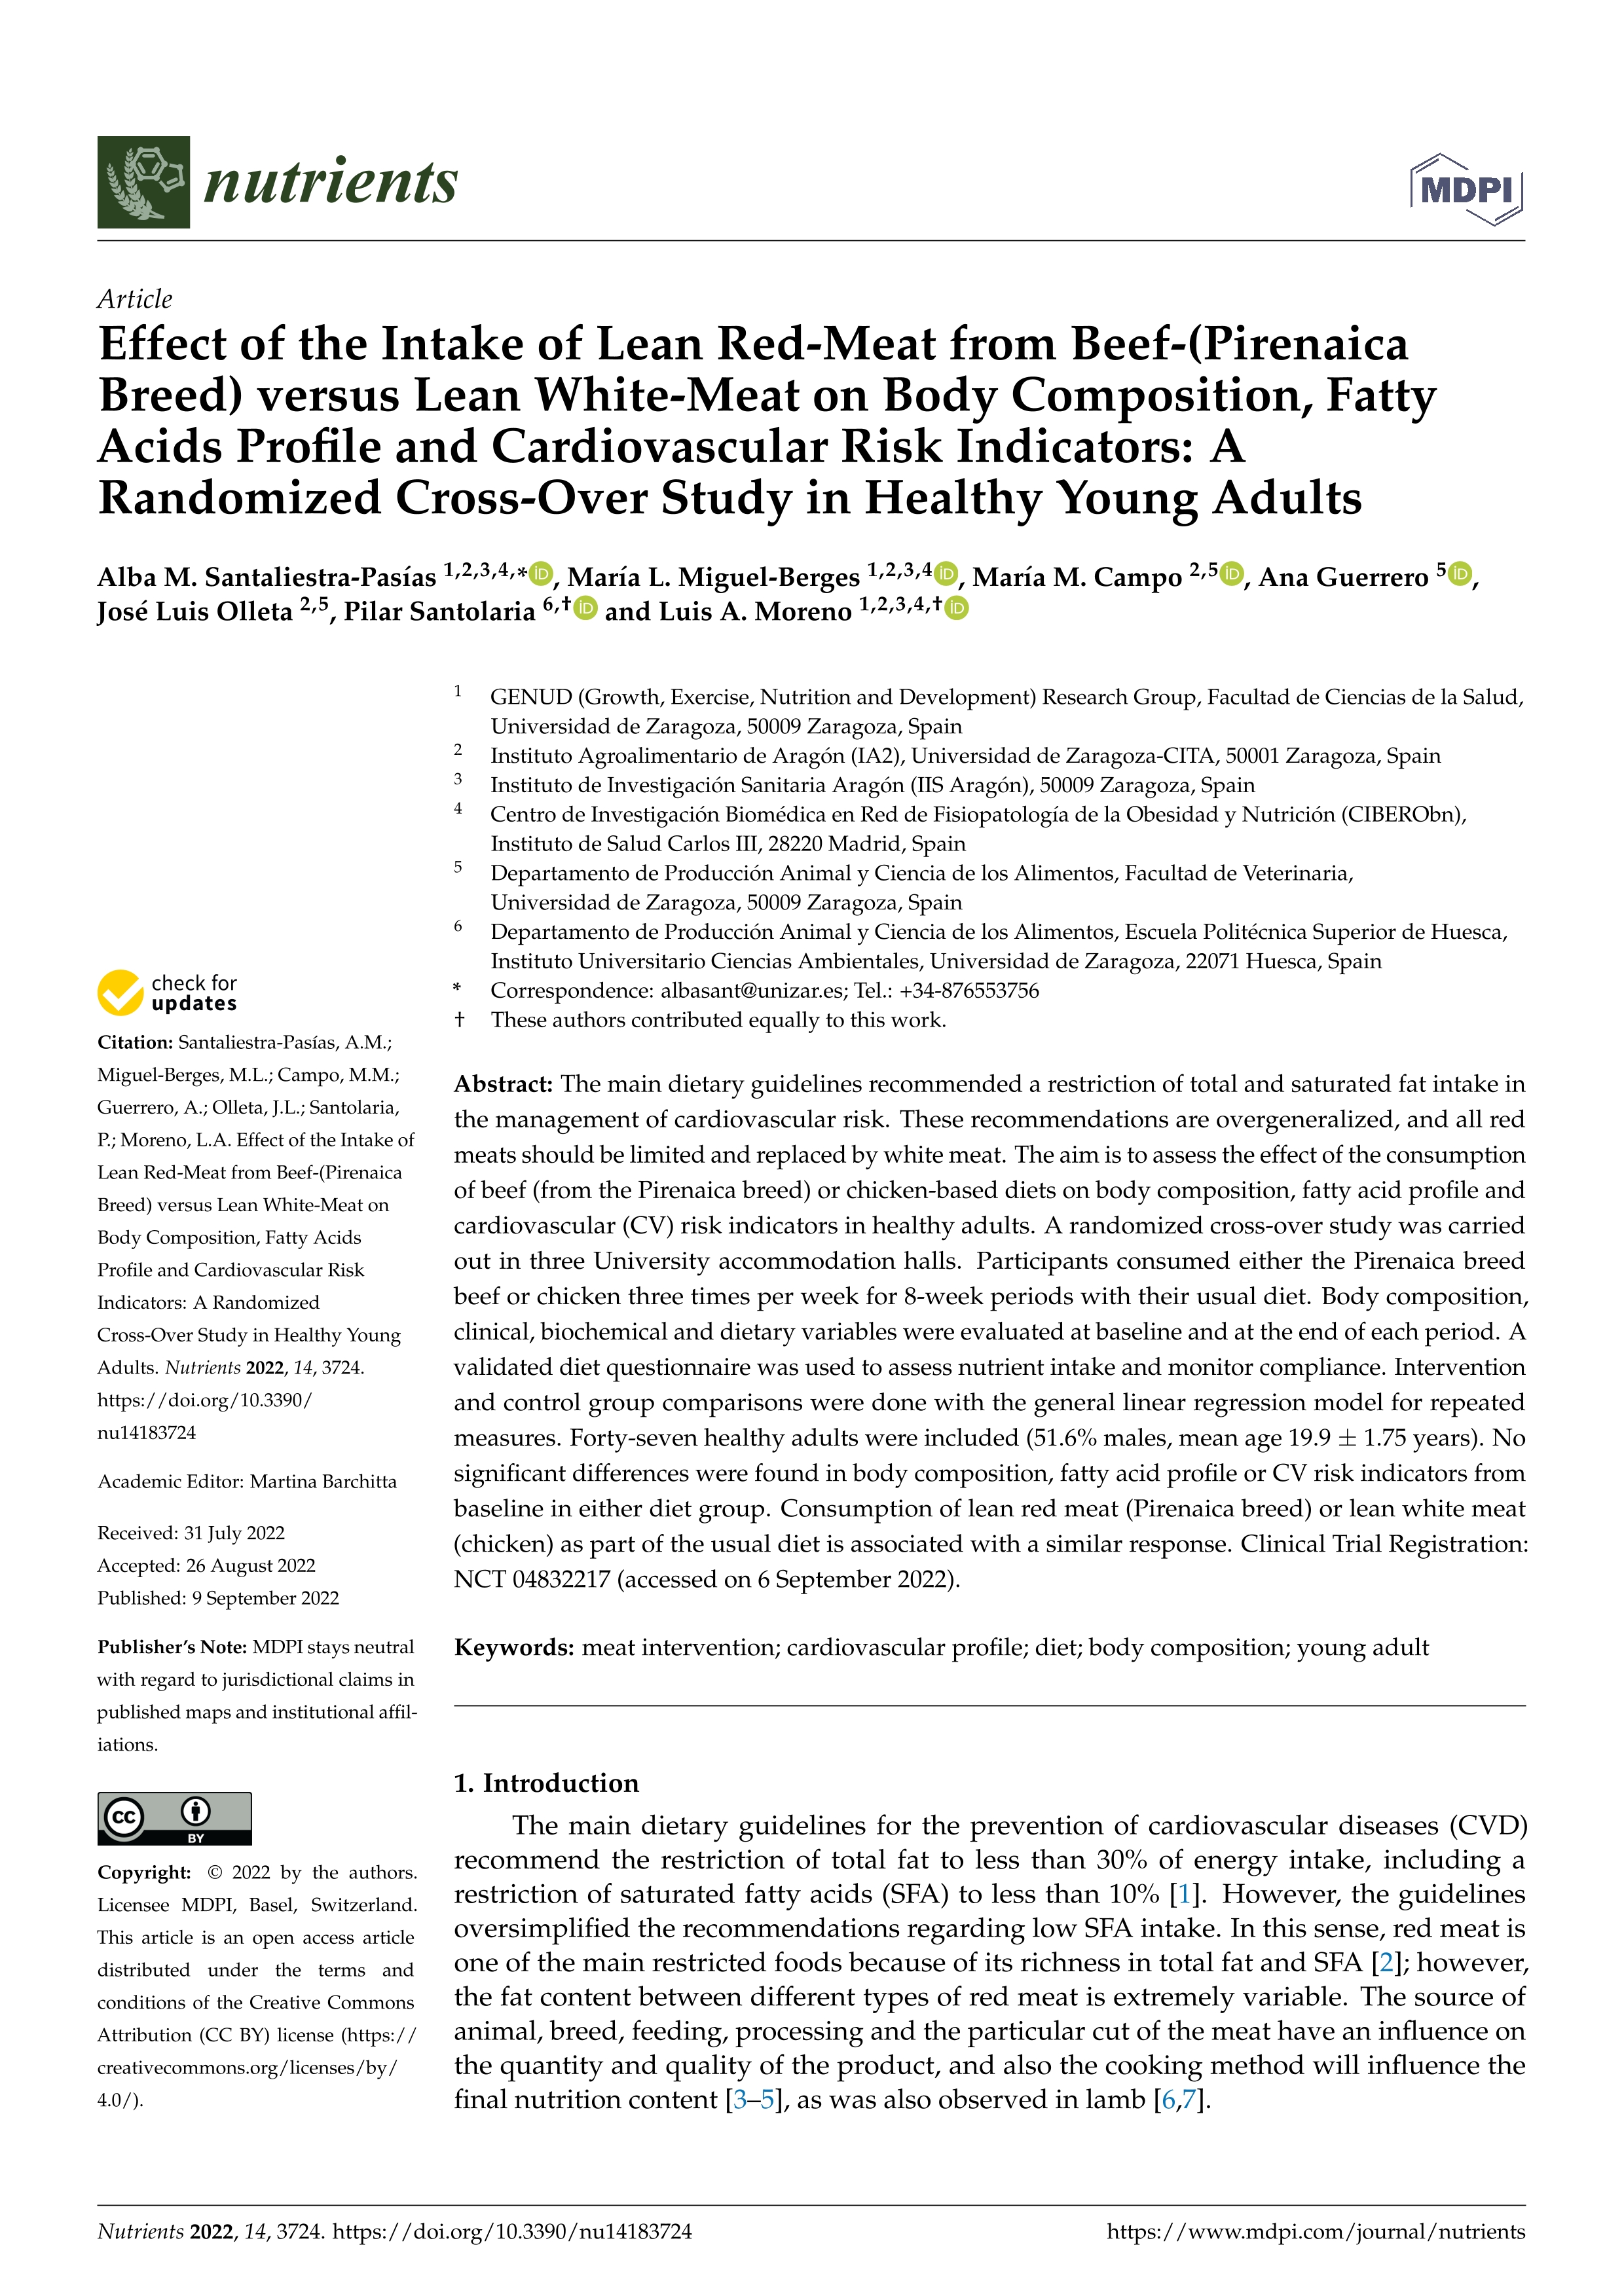 Effect of the intake of lean Red-Meat from beef-(Pirenaica Breed) versus lean White-Meat on body composition, fatty acids profile and cardiovascular risk indicators: a randomized cross-over study in healthy young adults